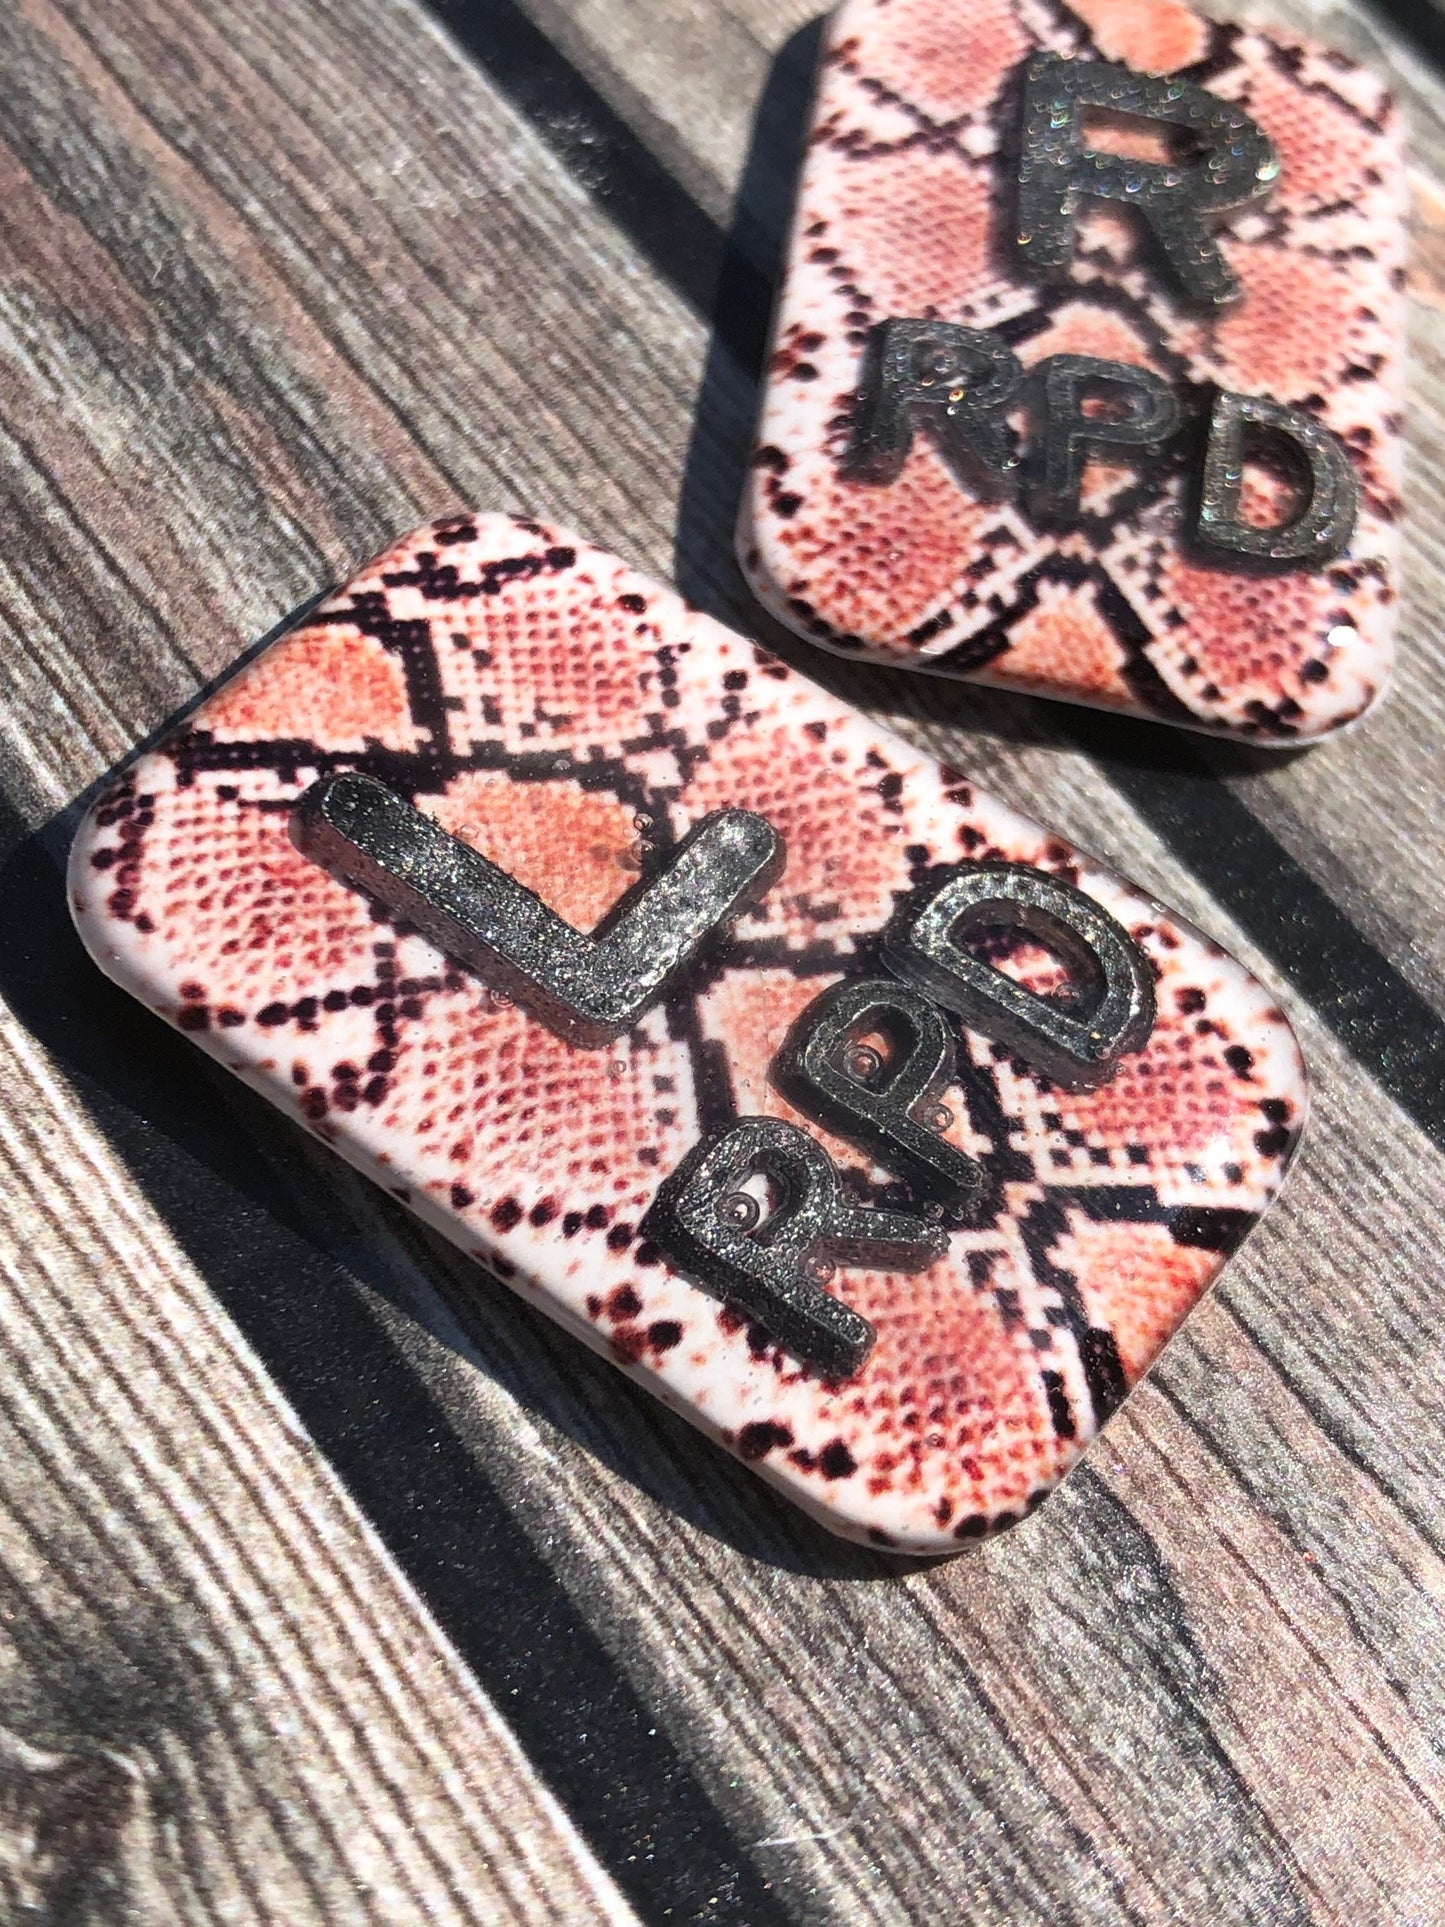 Snakeskin Print Xray Markers Customized with Black Initials